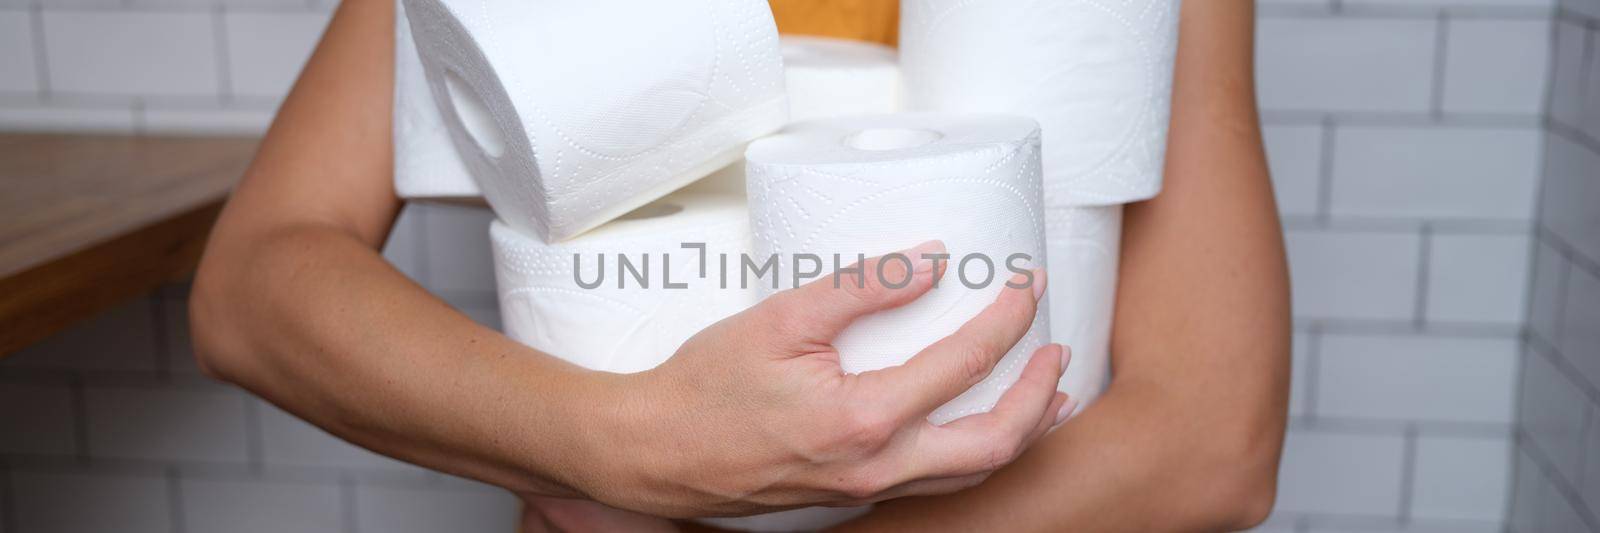 Woman holding many rolls of toilet paper in bathroom closeup by kuprevich